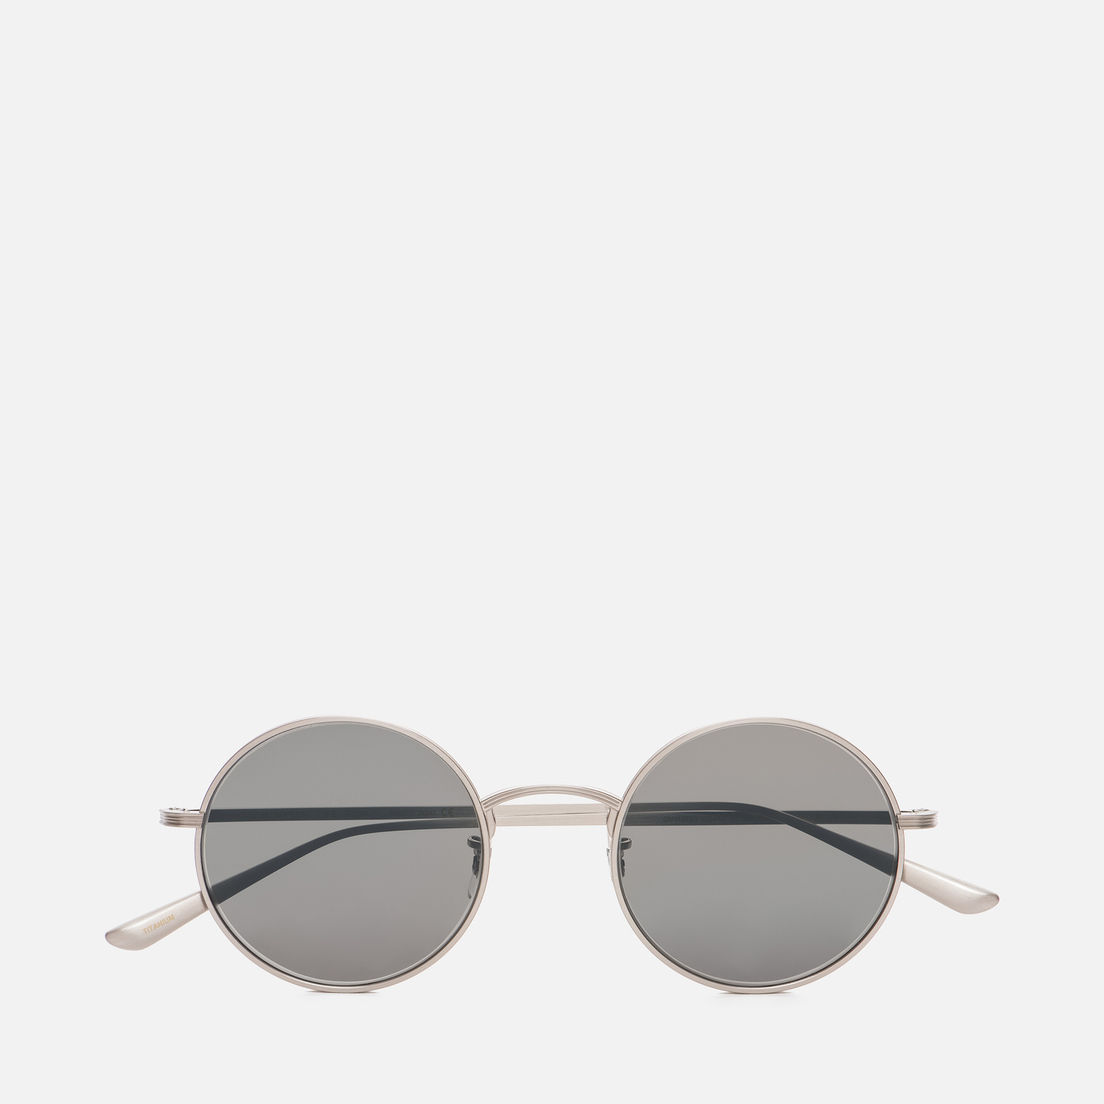 Oliver Peoples Солнцезащитные очки The Row After Midnight